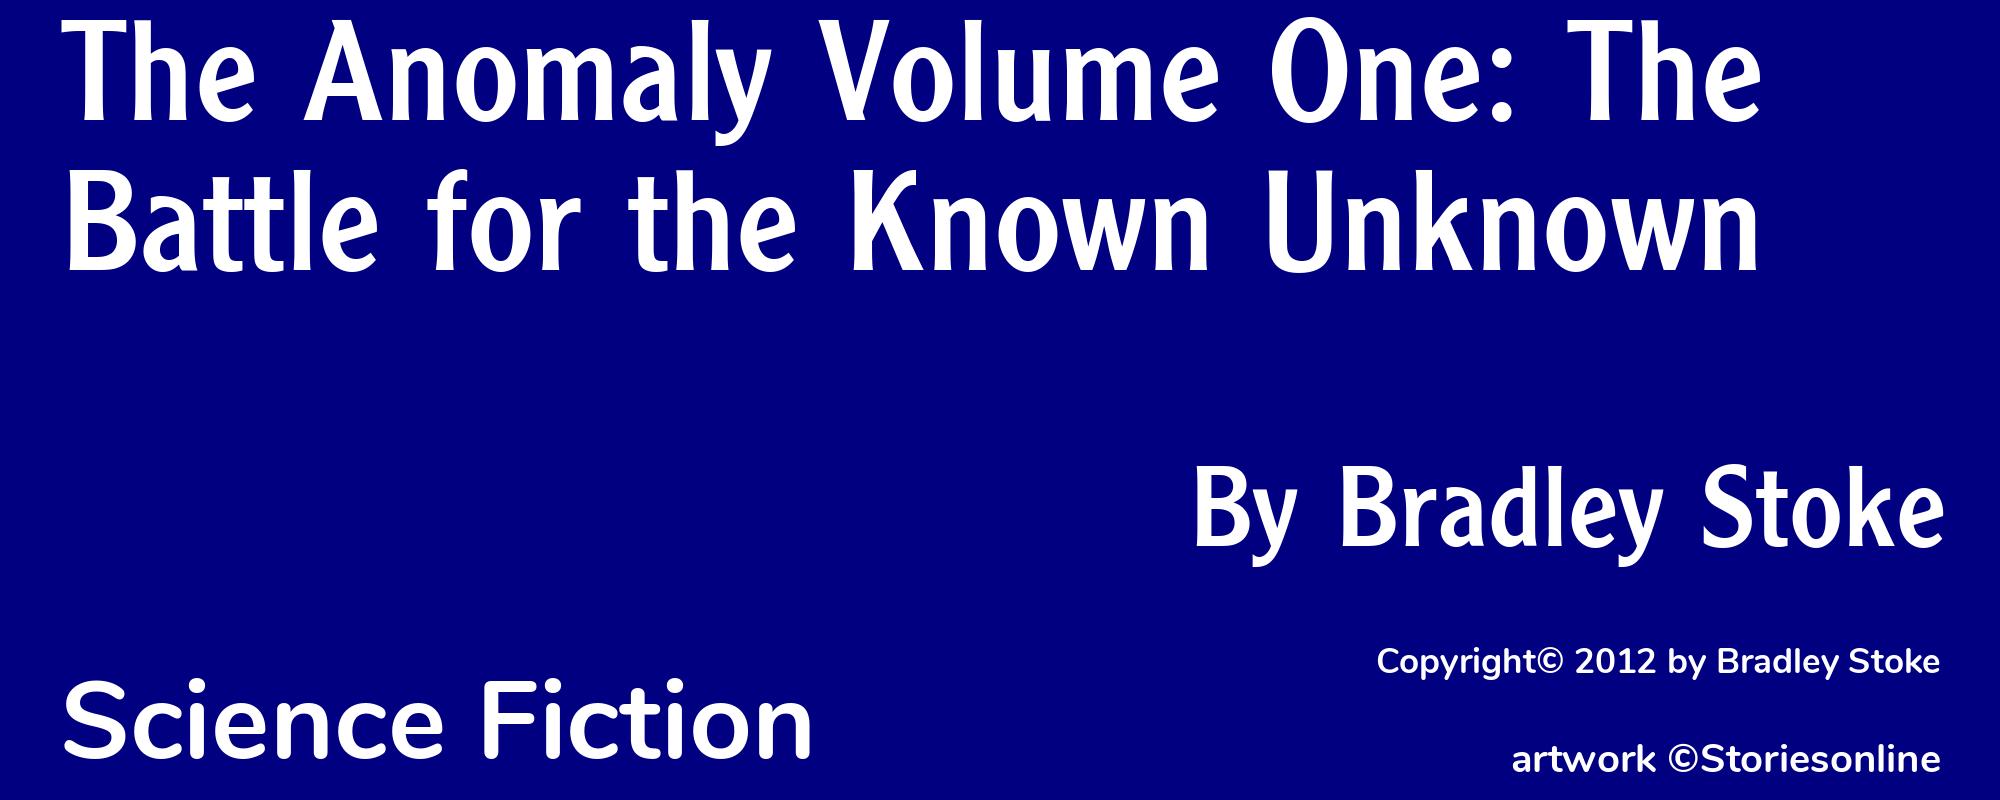 The Anomaly Volume One: The Battle for the Known Unknown - Cover